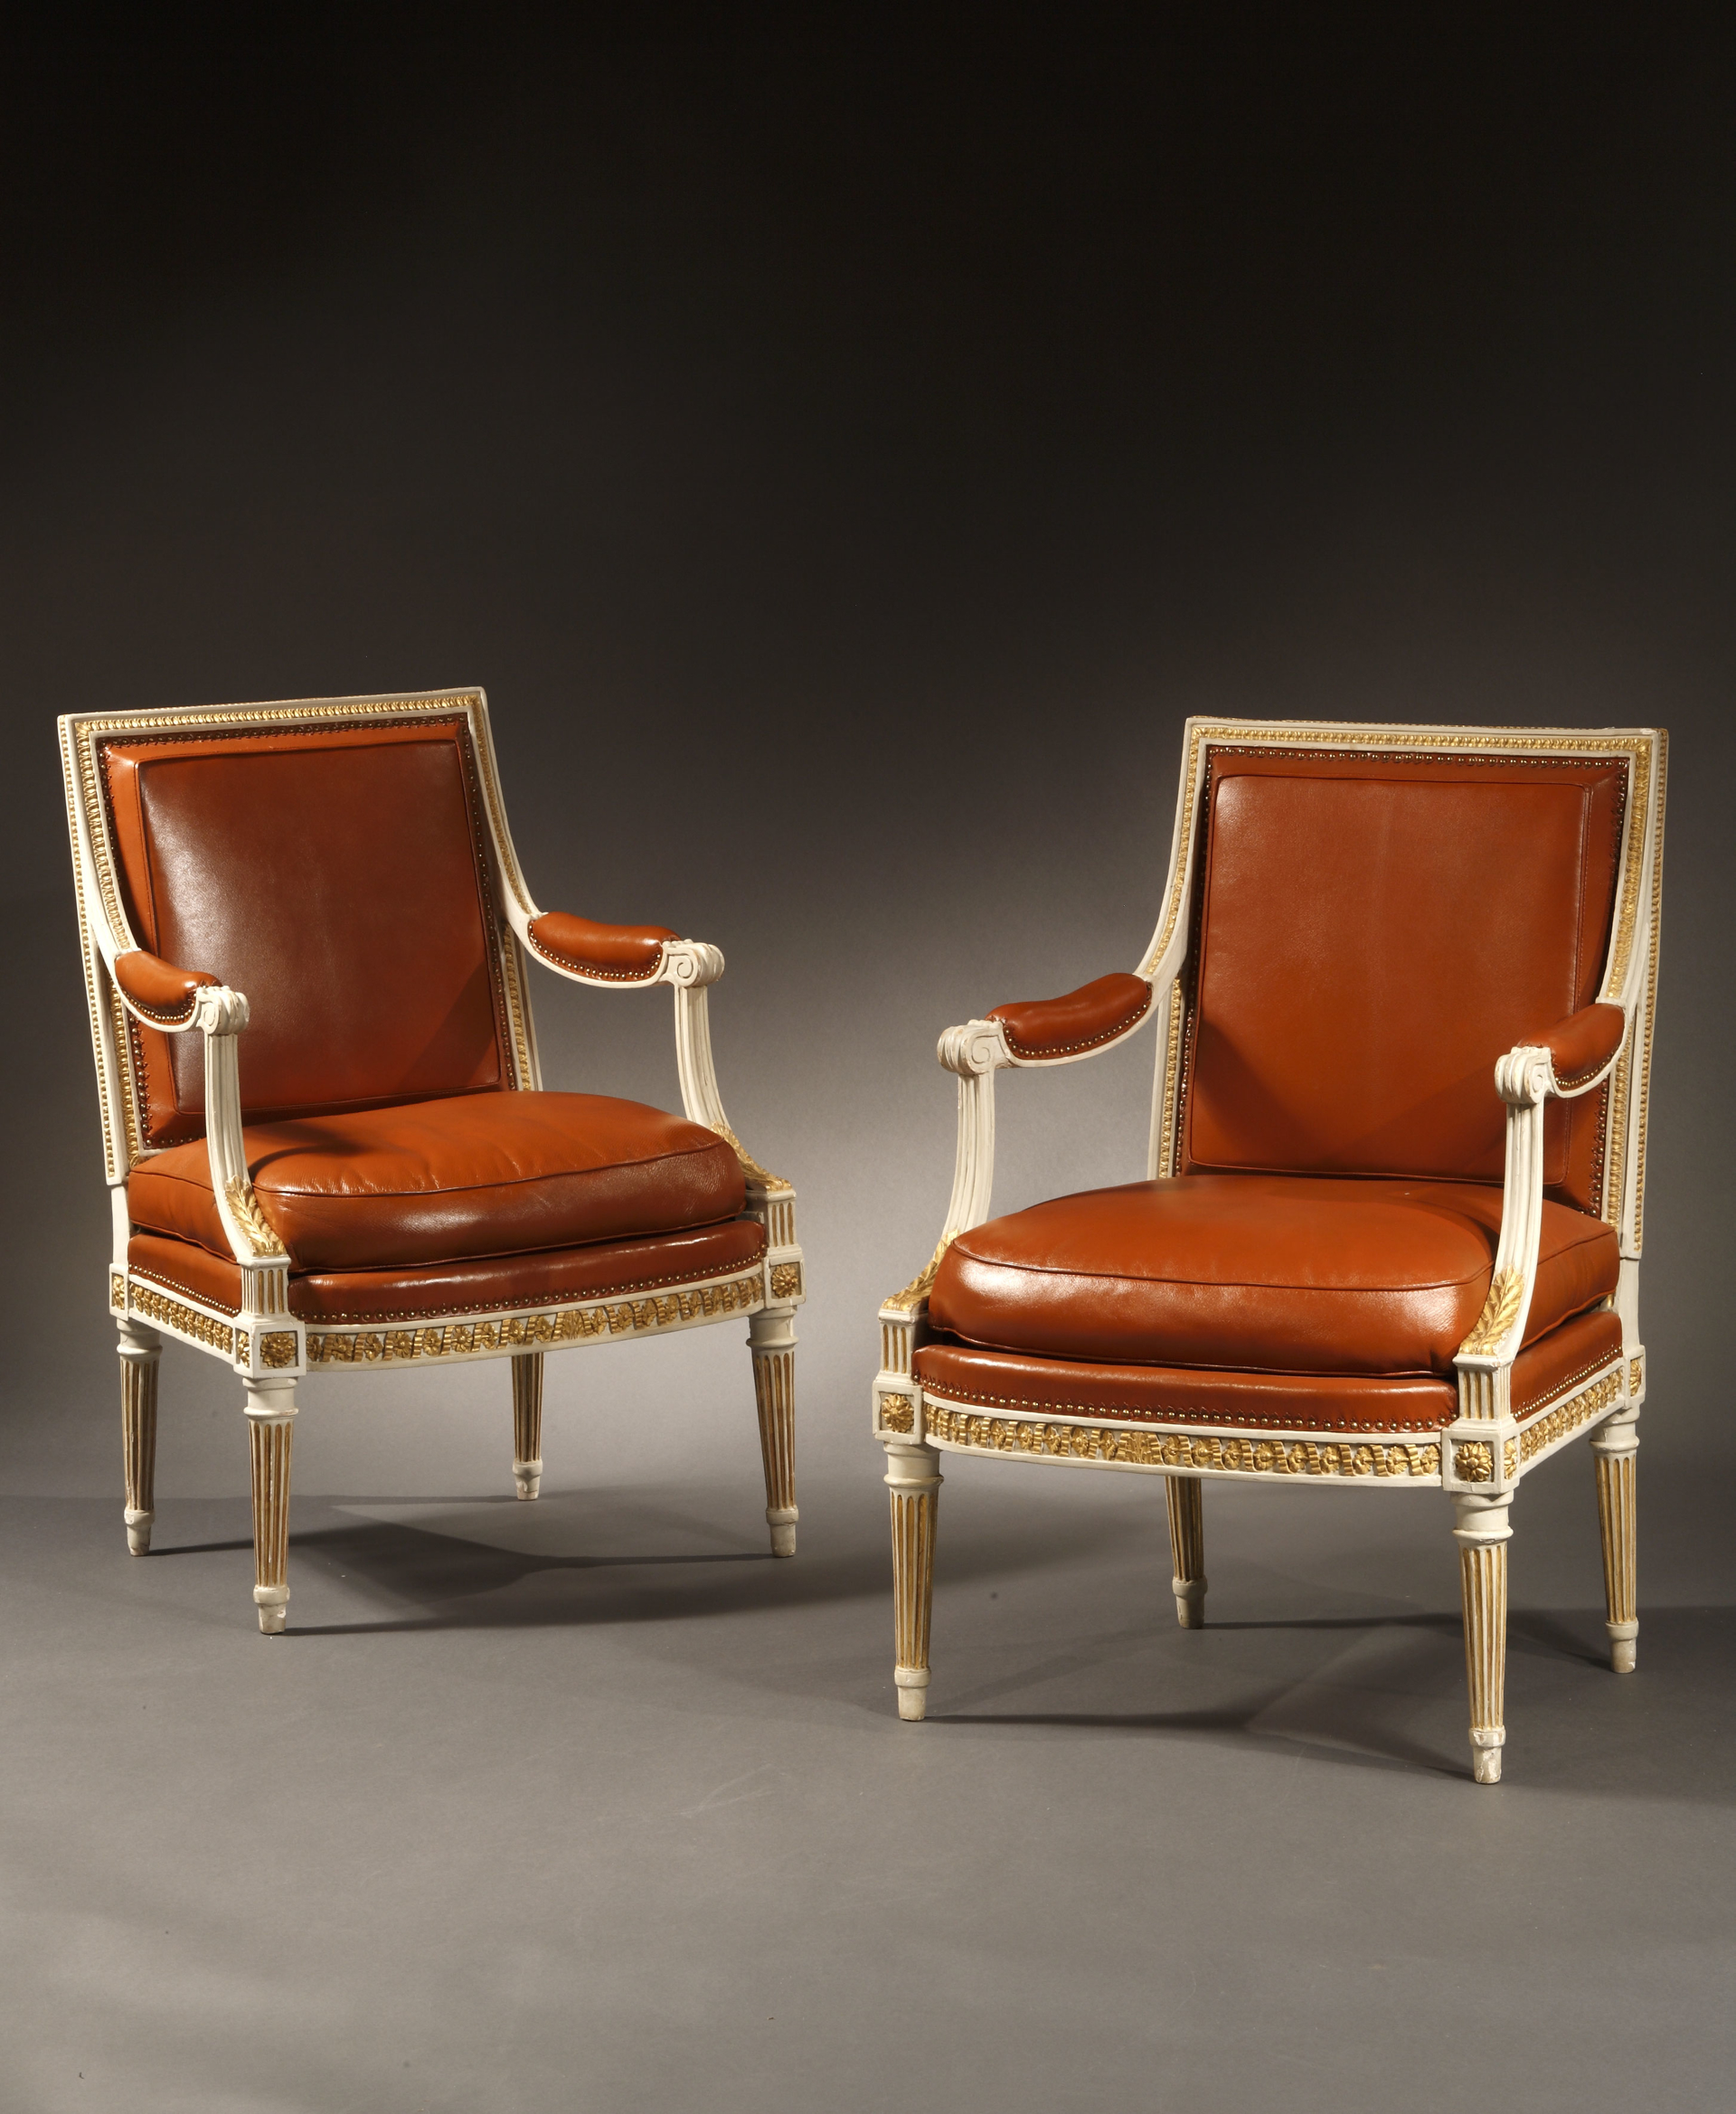 PAIR OF LOUIS XVI PAINTED AND PARCEL GILT FAUTEUILS STAMPED H. JACOB by Henri Jacob